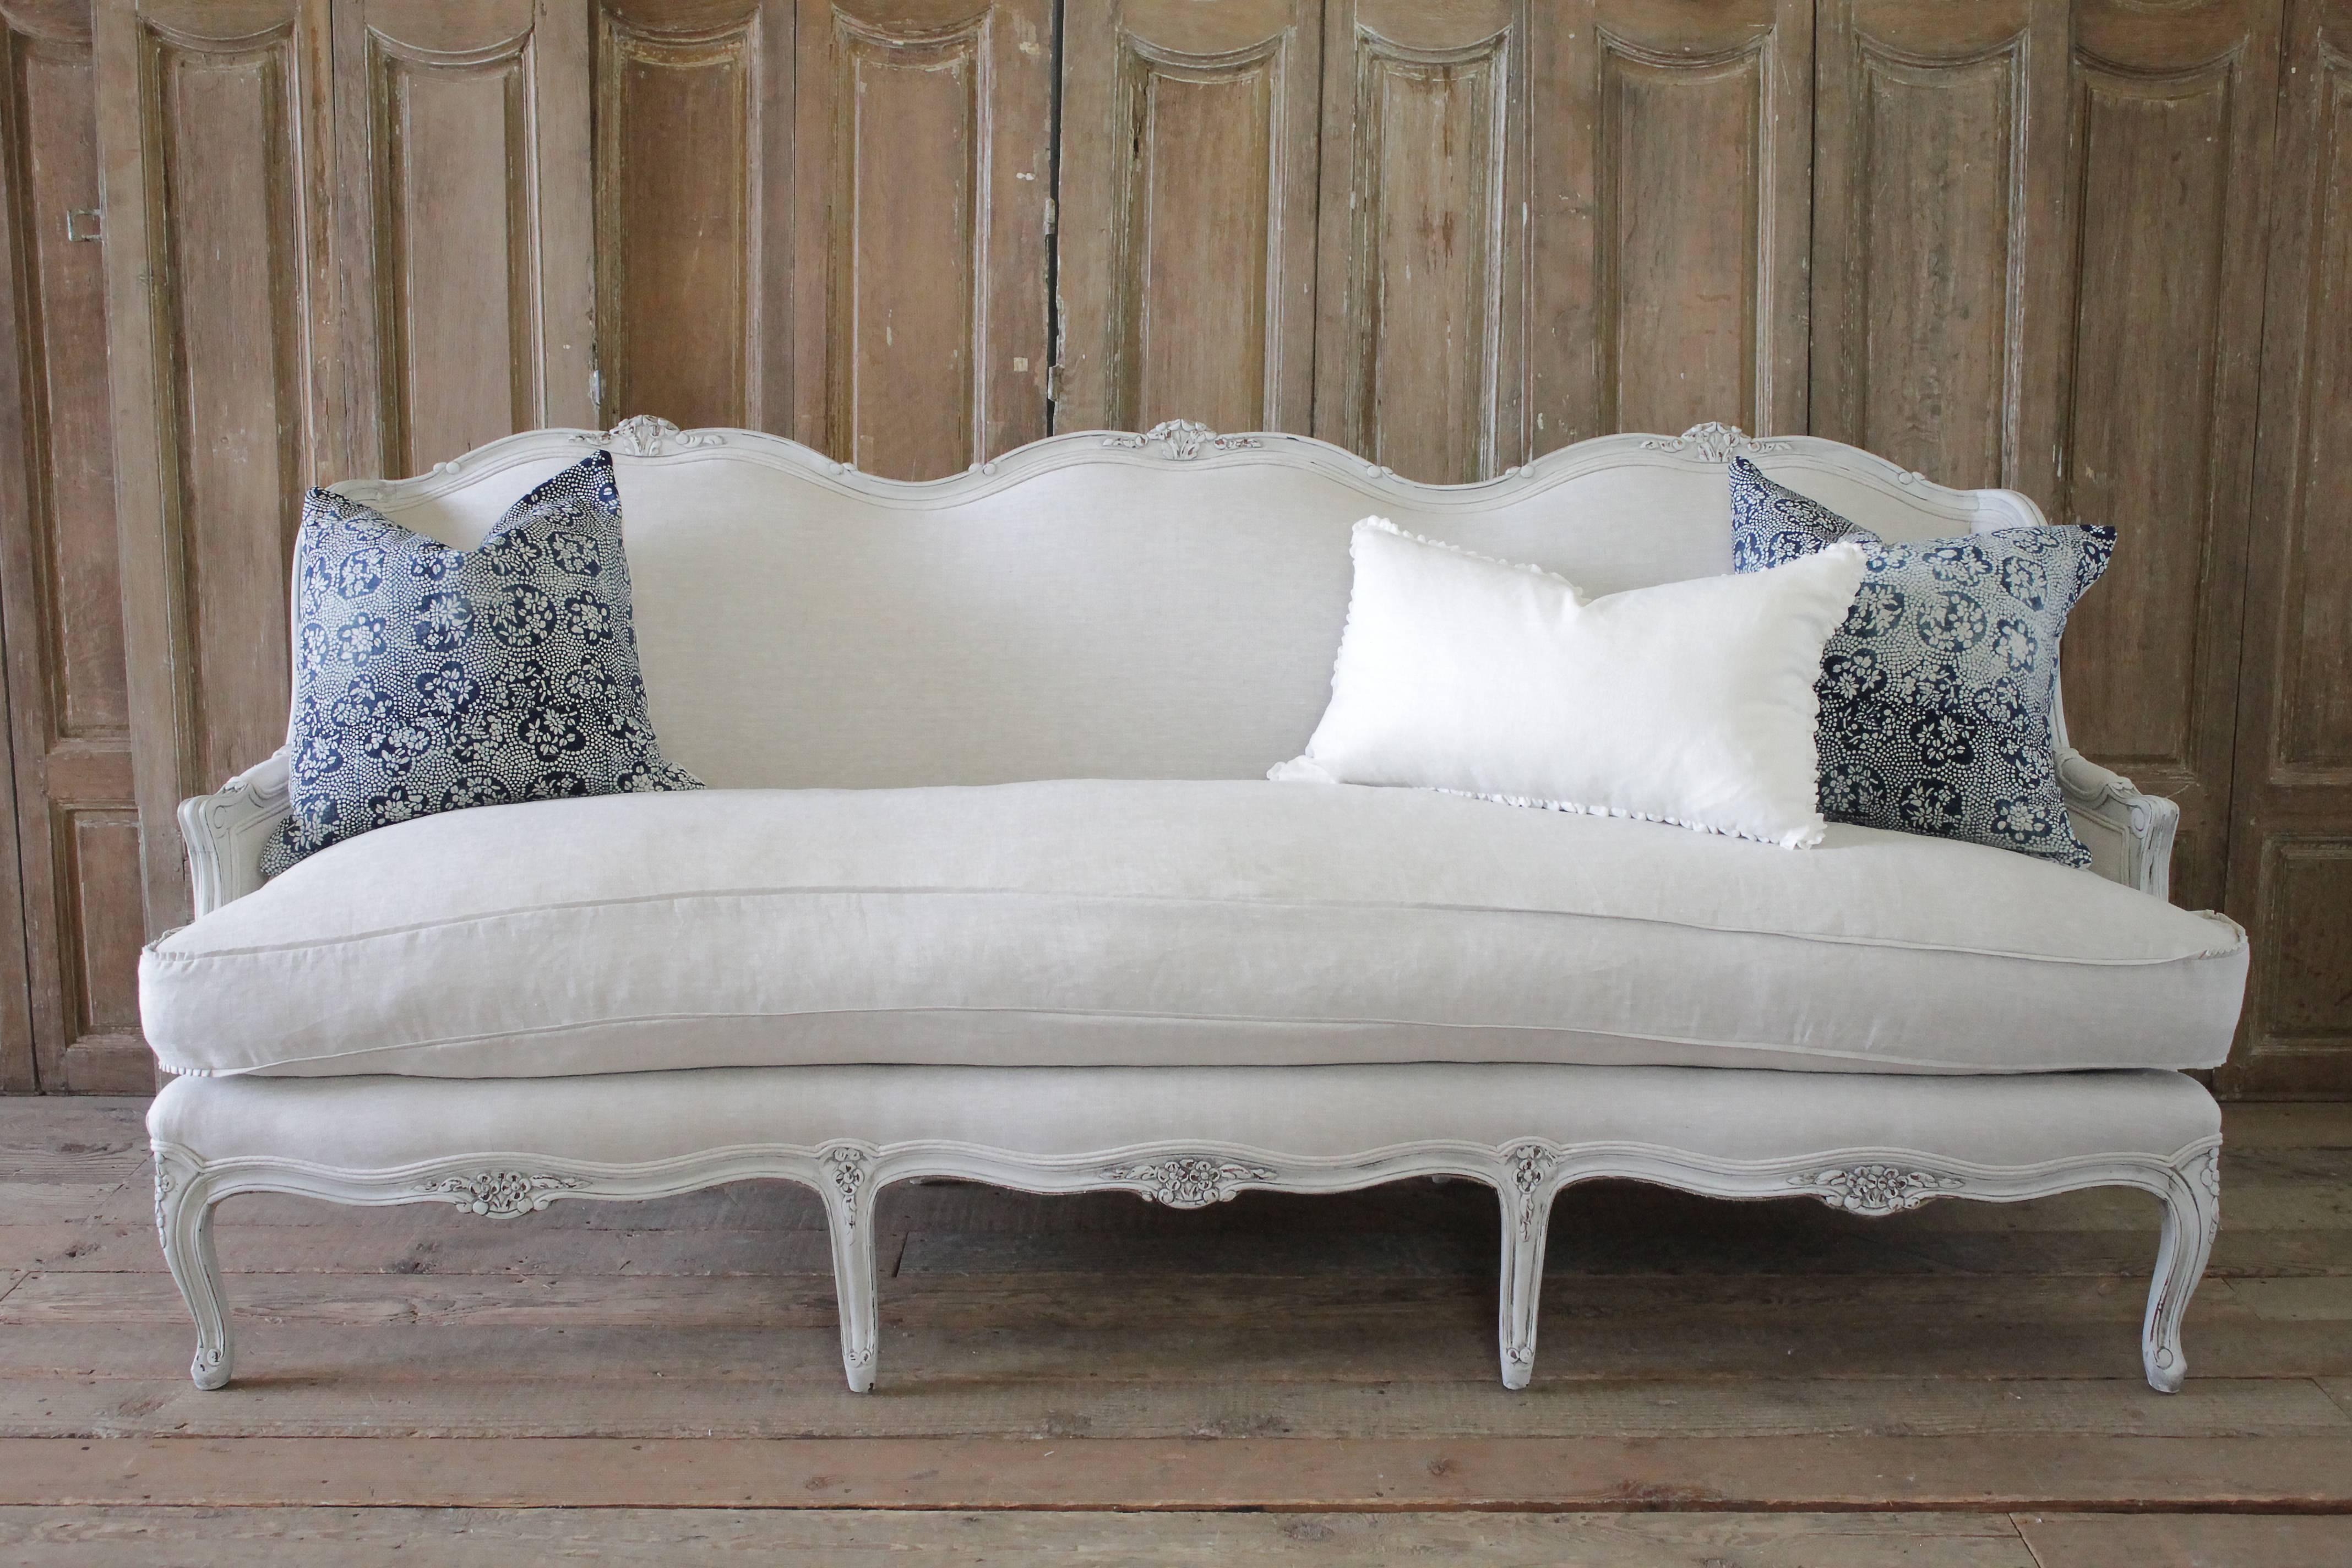 Lovely French country sofa painted in oyster white with subtle areas of distressing, and hand applied antique patina. Reupholstered in 100% pure Belgian linen, finished with a double welt edge, and new plump down cushion.
Measures: 84